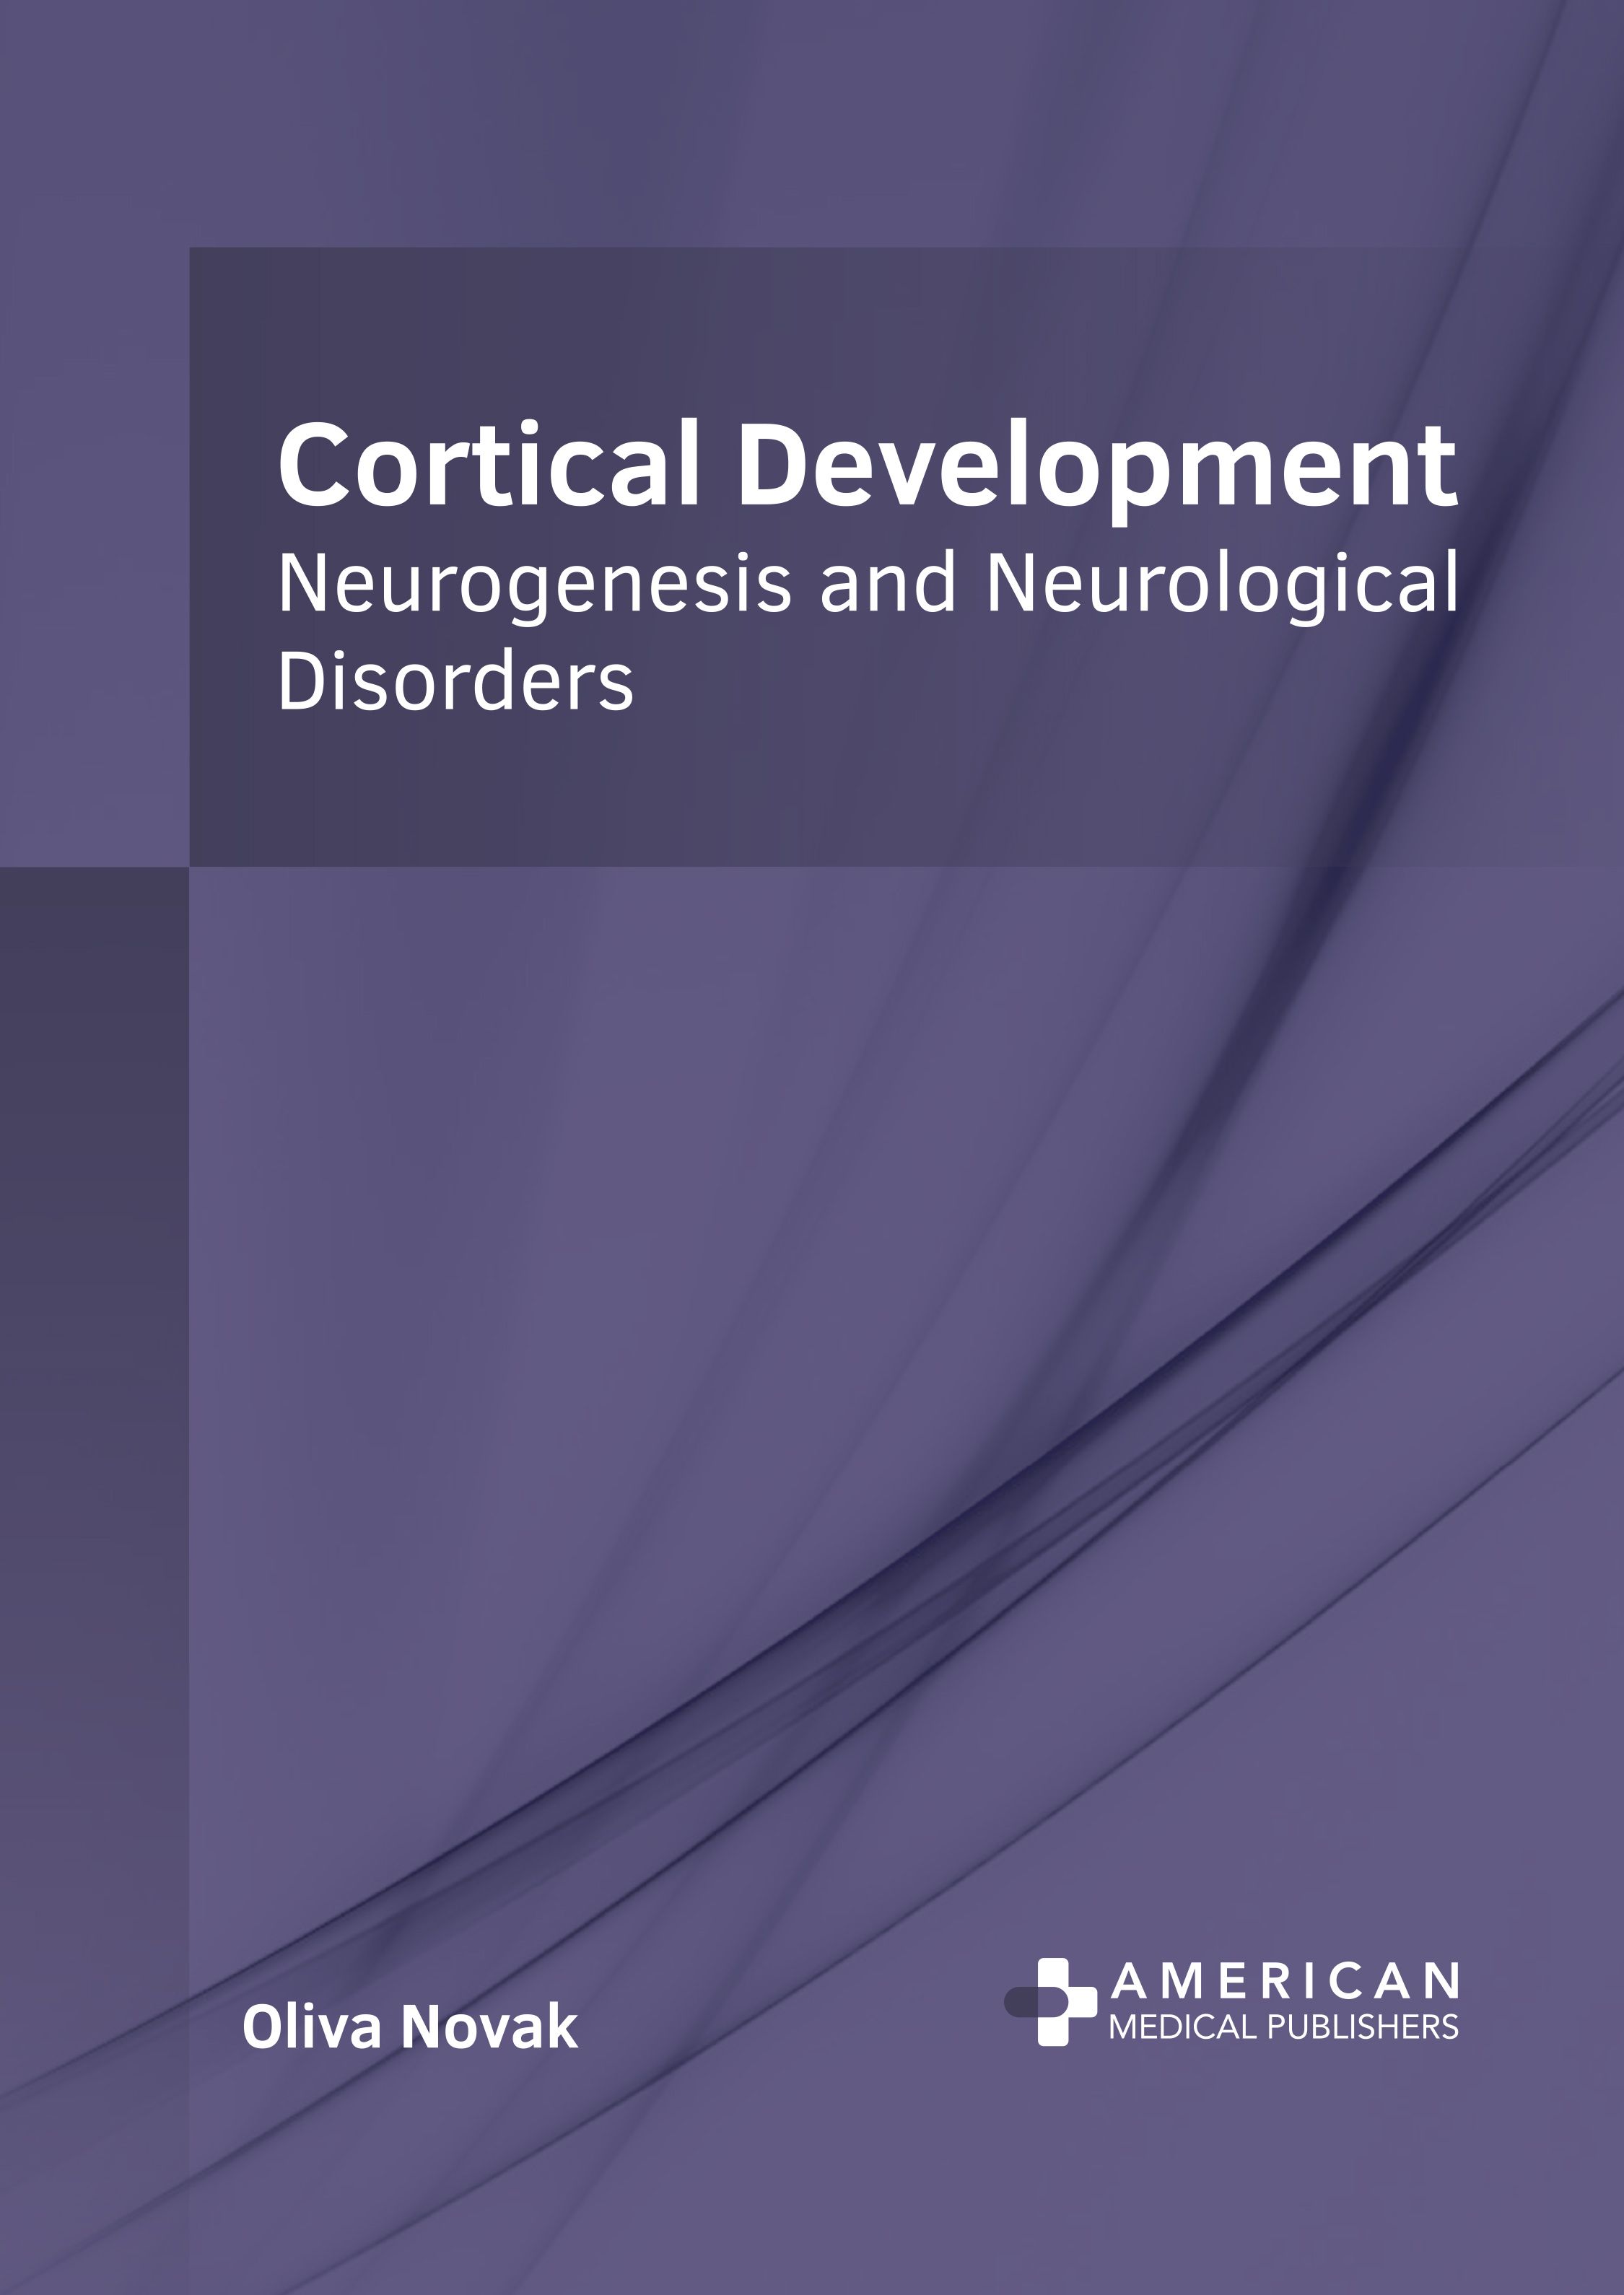 

exclusive-publishers/american-medical-publishers/cortical-development-neurogenesis-and-neurological-disorders-9798887400235